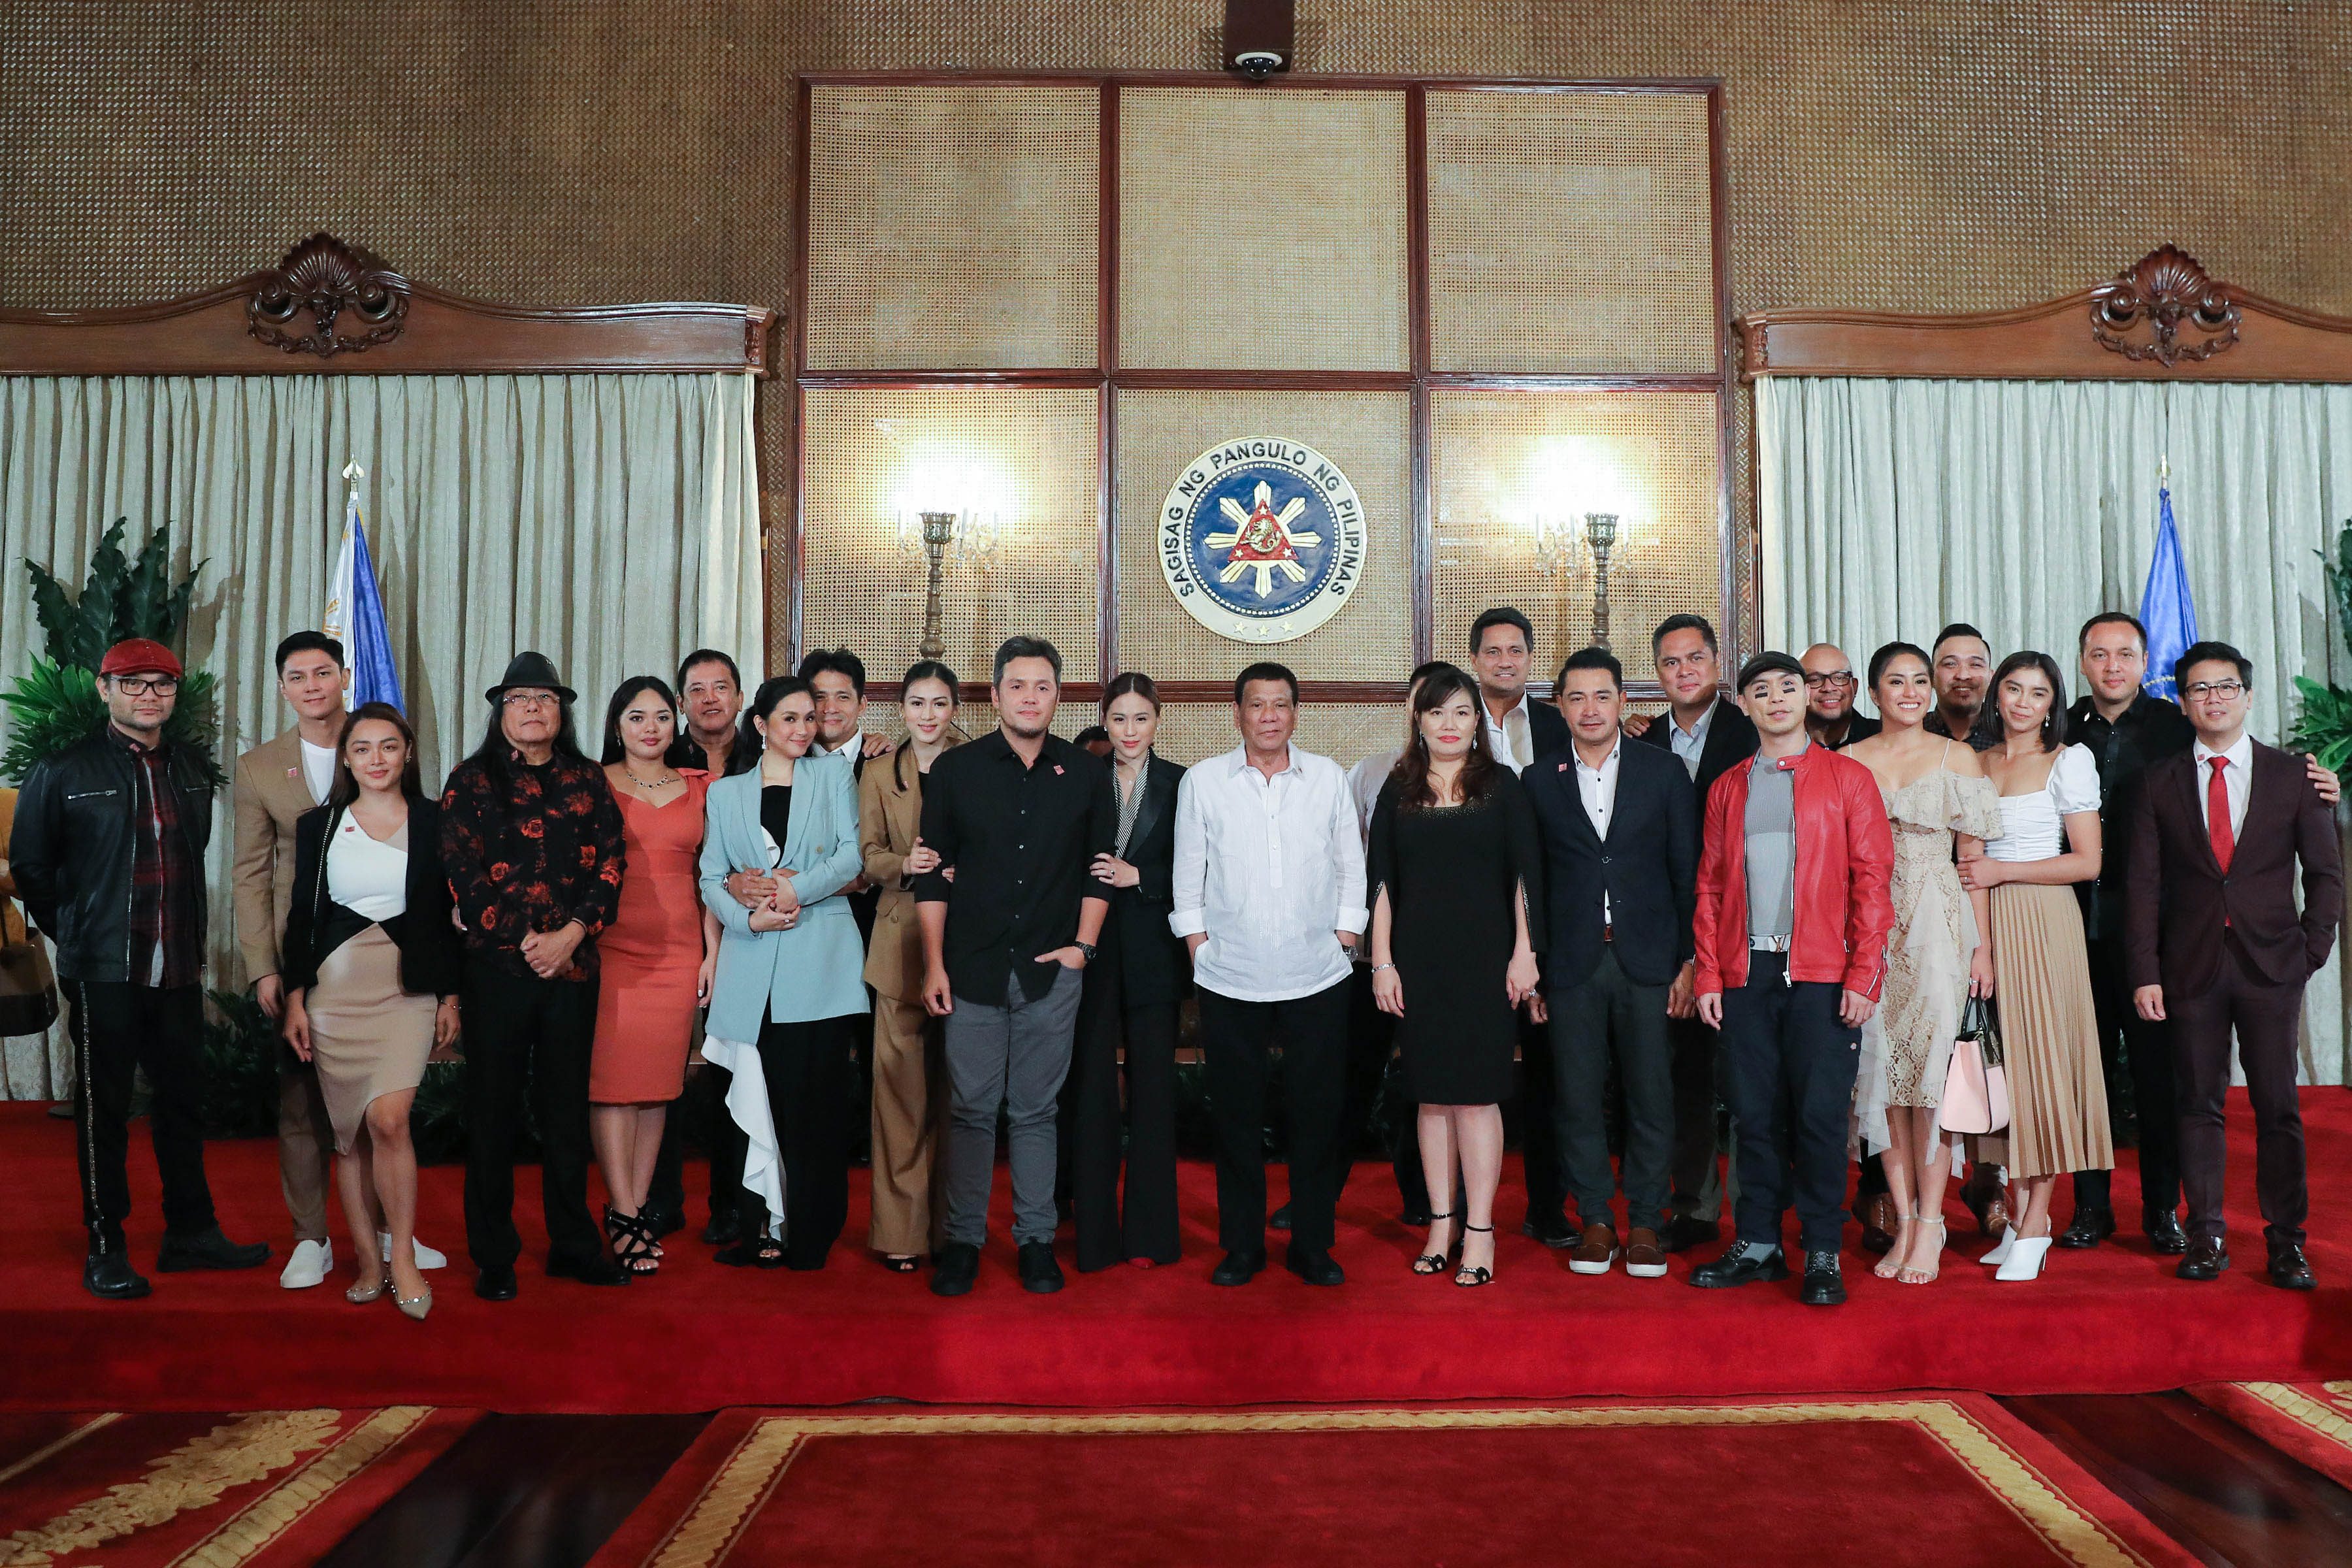 President Rodrigo Roa Duterte and his long-time partner Cielito "Honeylet" Avanceña pose for posterity with some of the celebrity guests  during a dinner he hosted at the Malacañan Palace on May 7, 2019. Photo by Valerie Escalera/Presidential Photo 